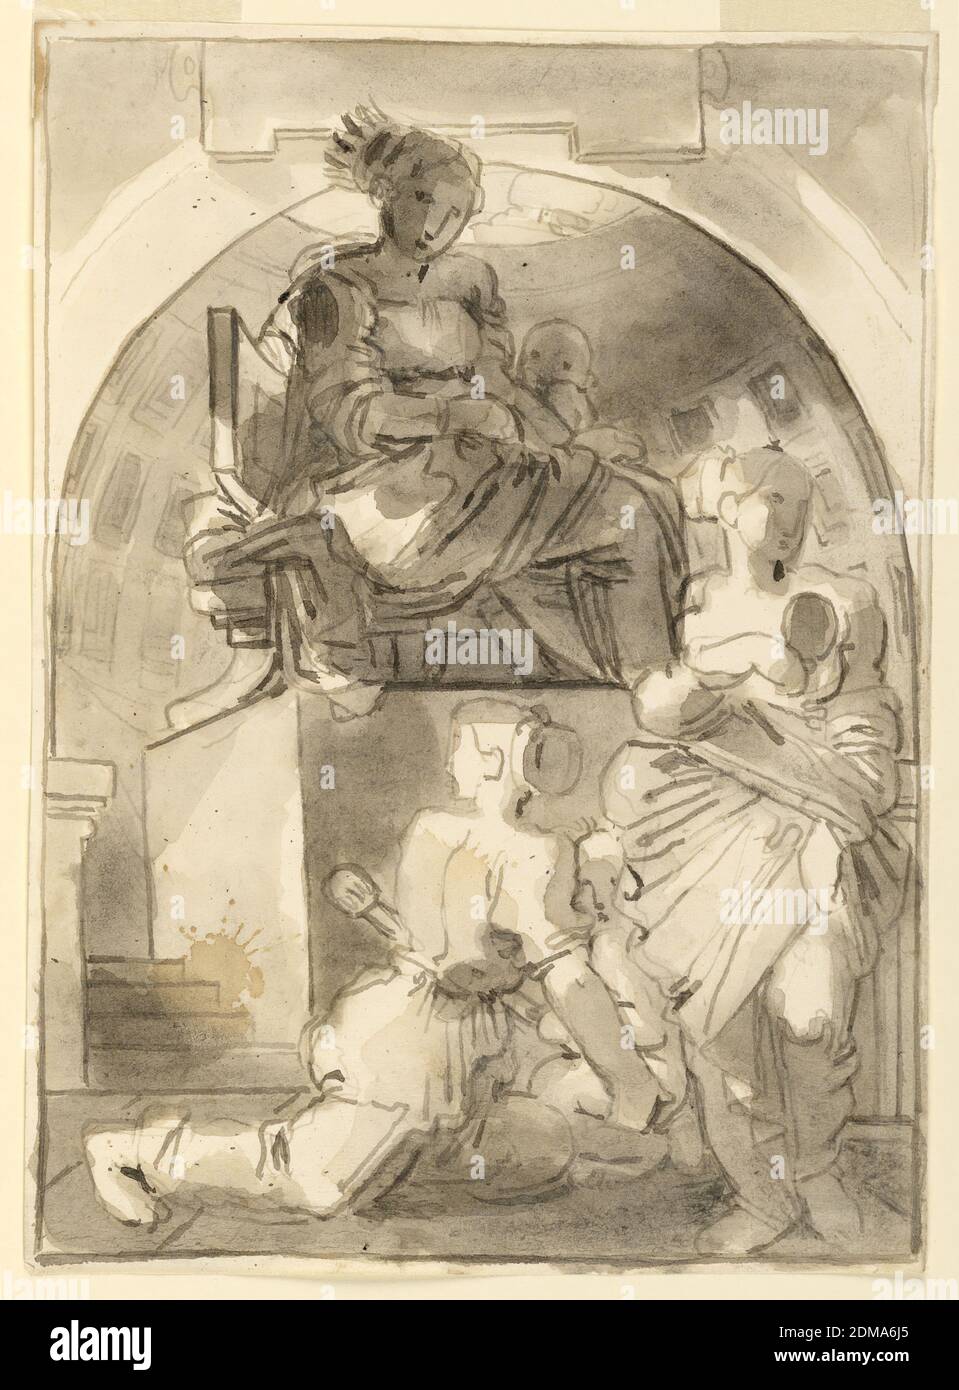 The Virgin and Child with Worshippers in Classical Interior, Fortunato Duranti, Italian, 1787 - 1863, Pen and ink, brush and wash on paper, The Virgin and Child enthroned with Worshippers in Classical Interior., Rome, Italy, 1820–1850, Drawing Stock Photo